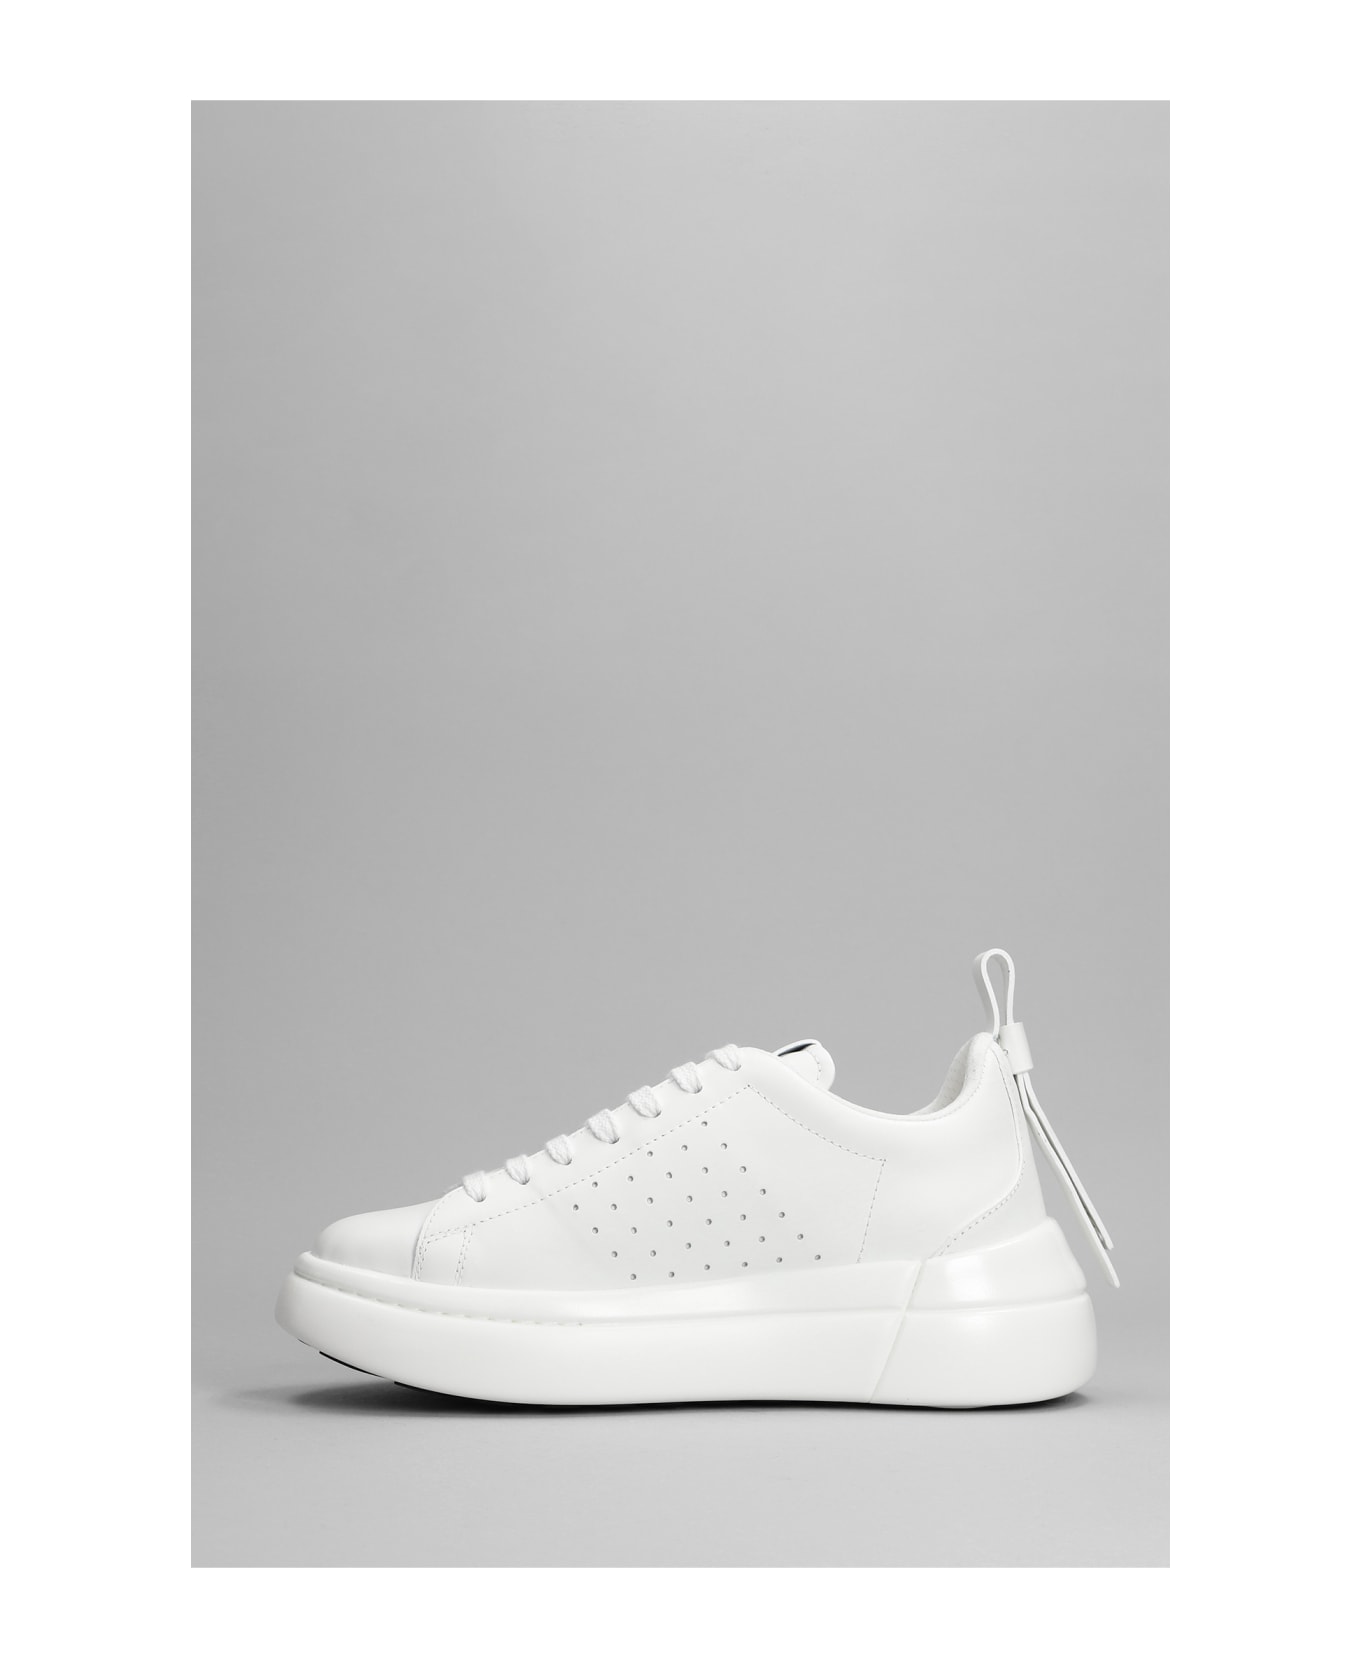 RED Valentino Bowalk Sneakers In White Leather - white ウェッジシューズ